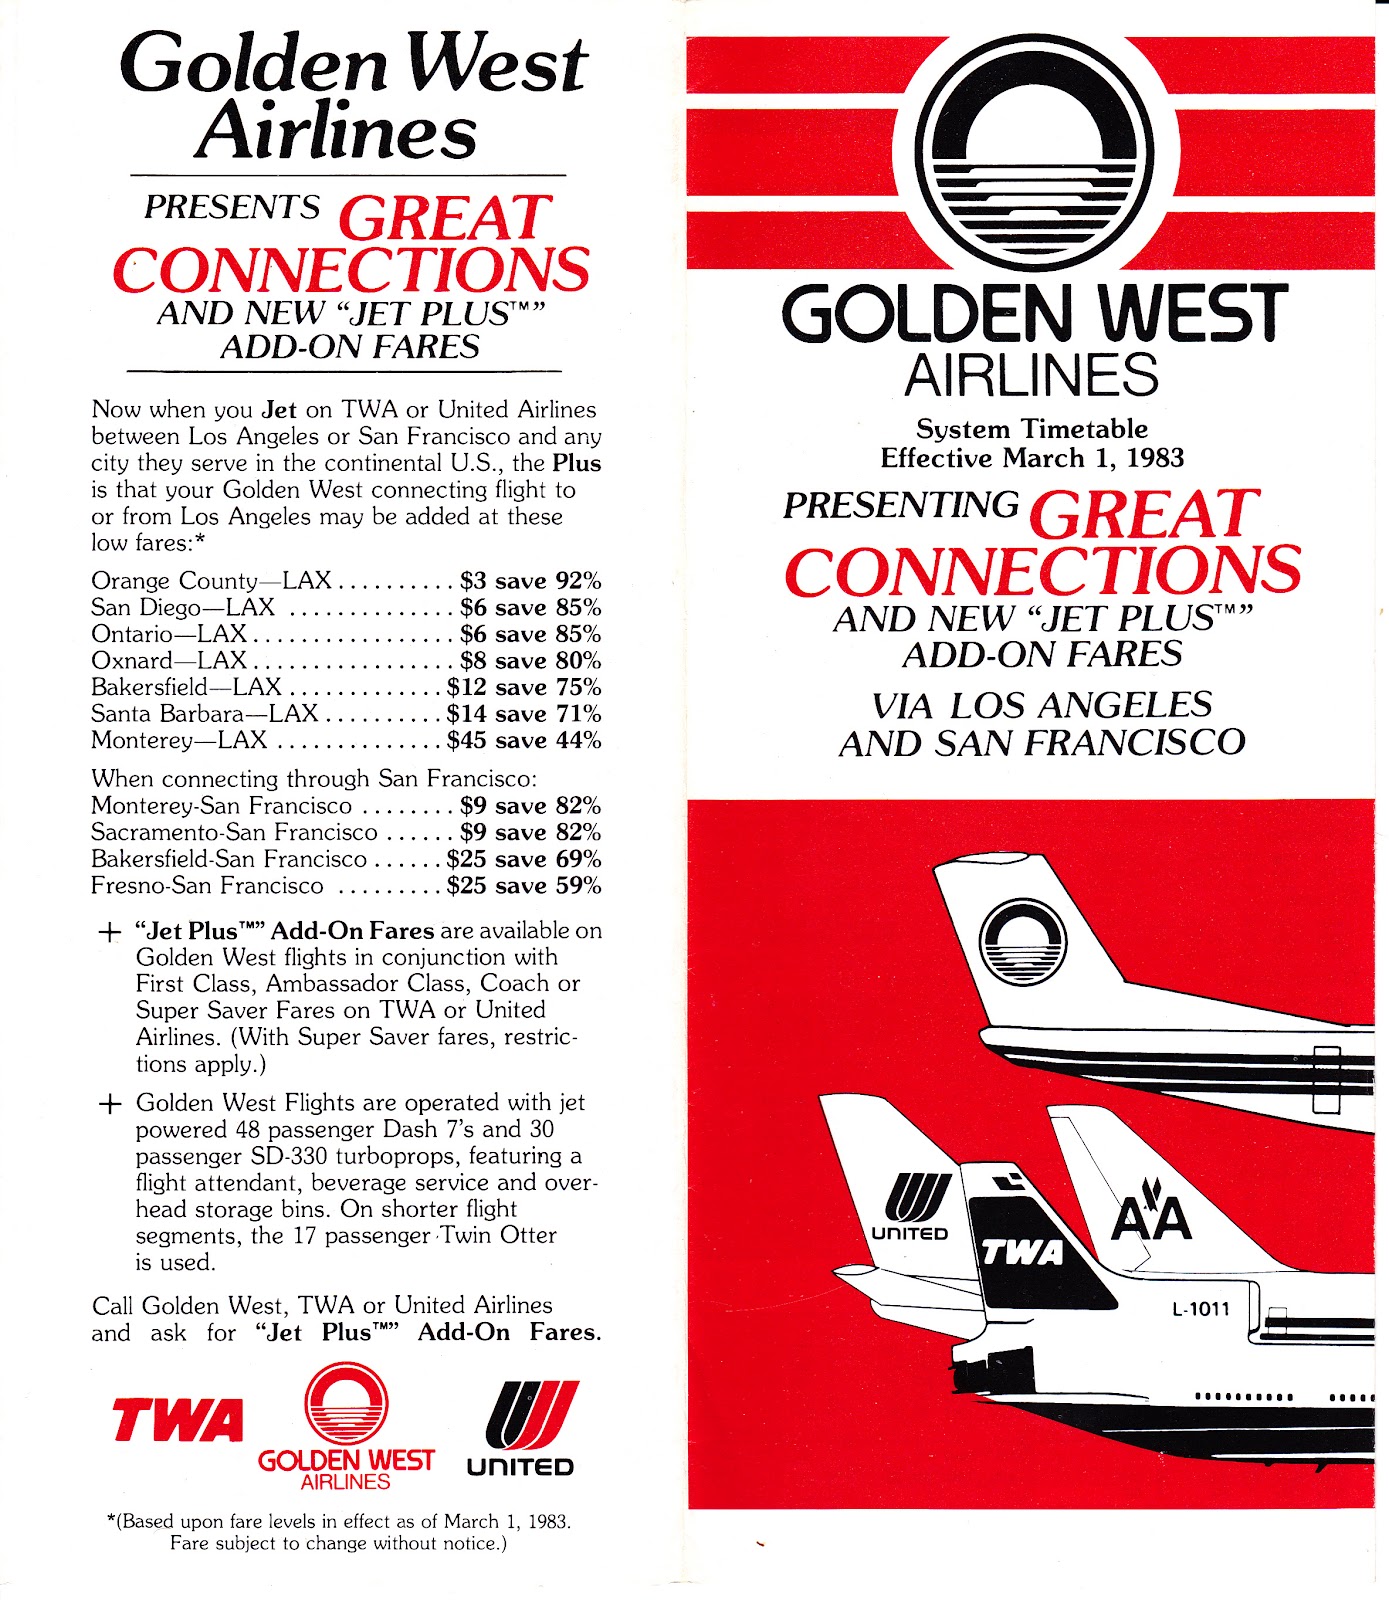 5081 Golden West Airlines system timetable 1/1/77 save 25% Buy 4 